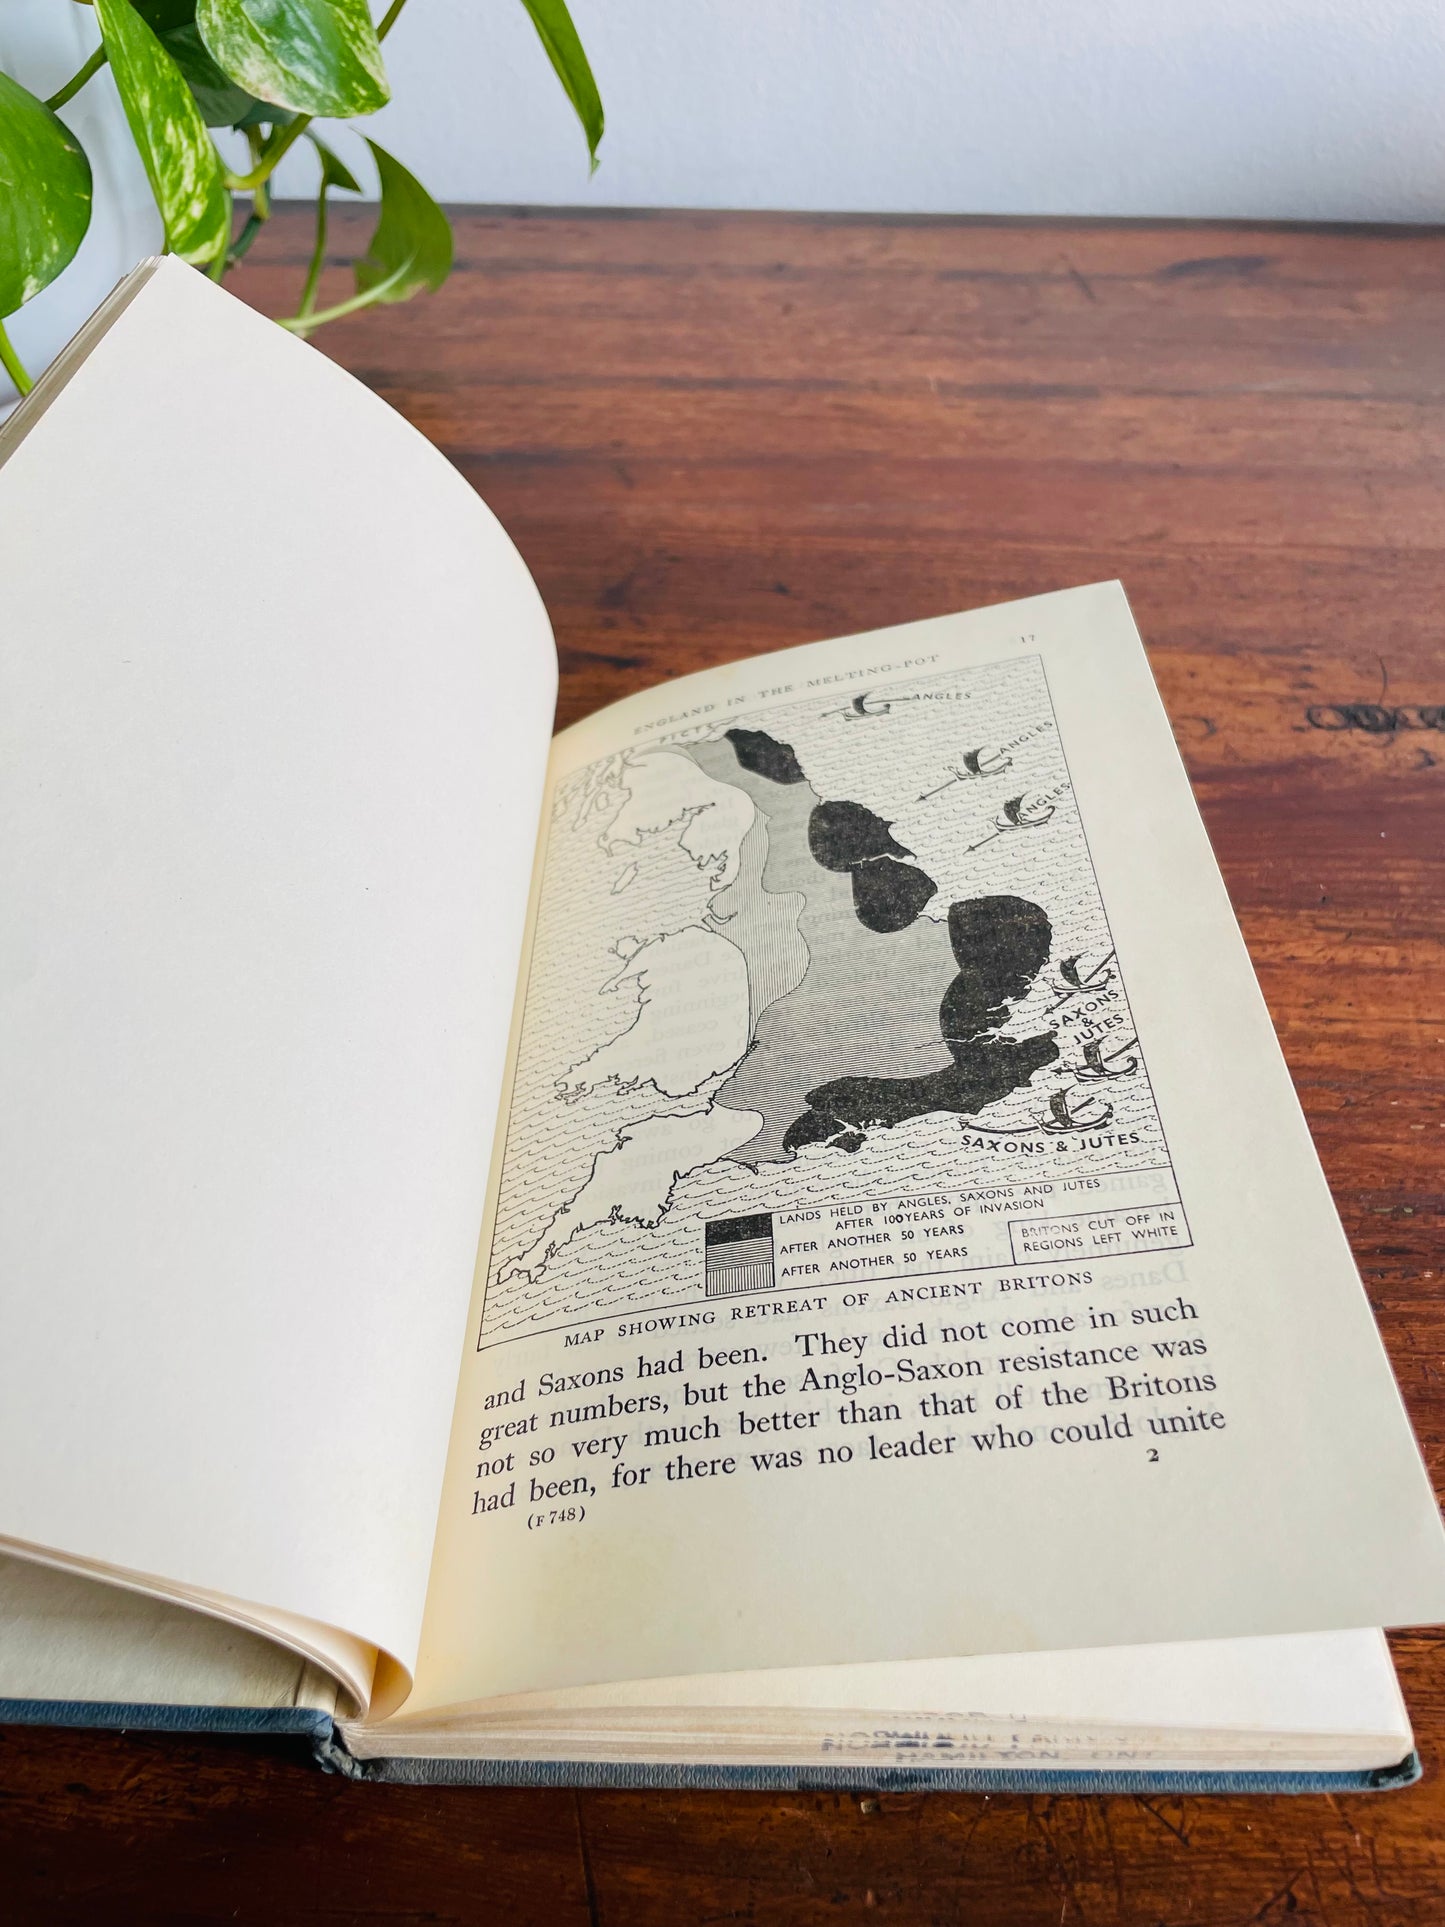 From Serf to Citizen Book One Clothbound Hardcover by W. C. J. Ward - Illustrated (1952)